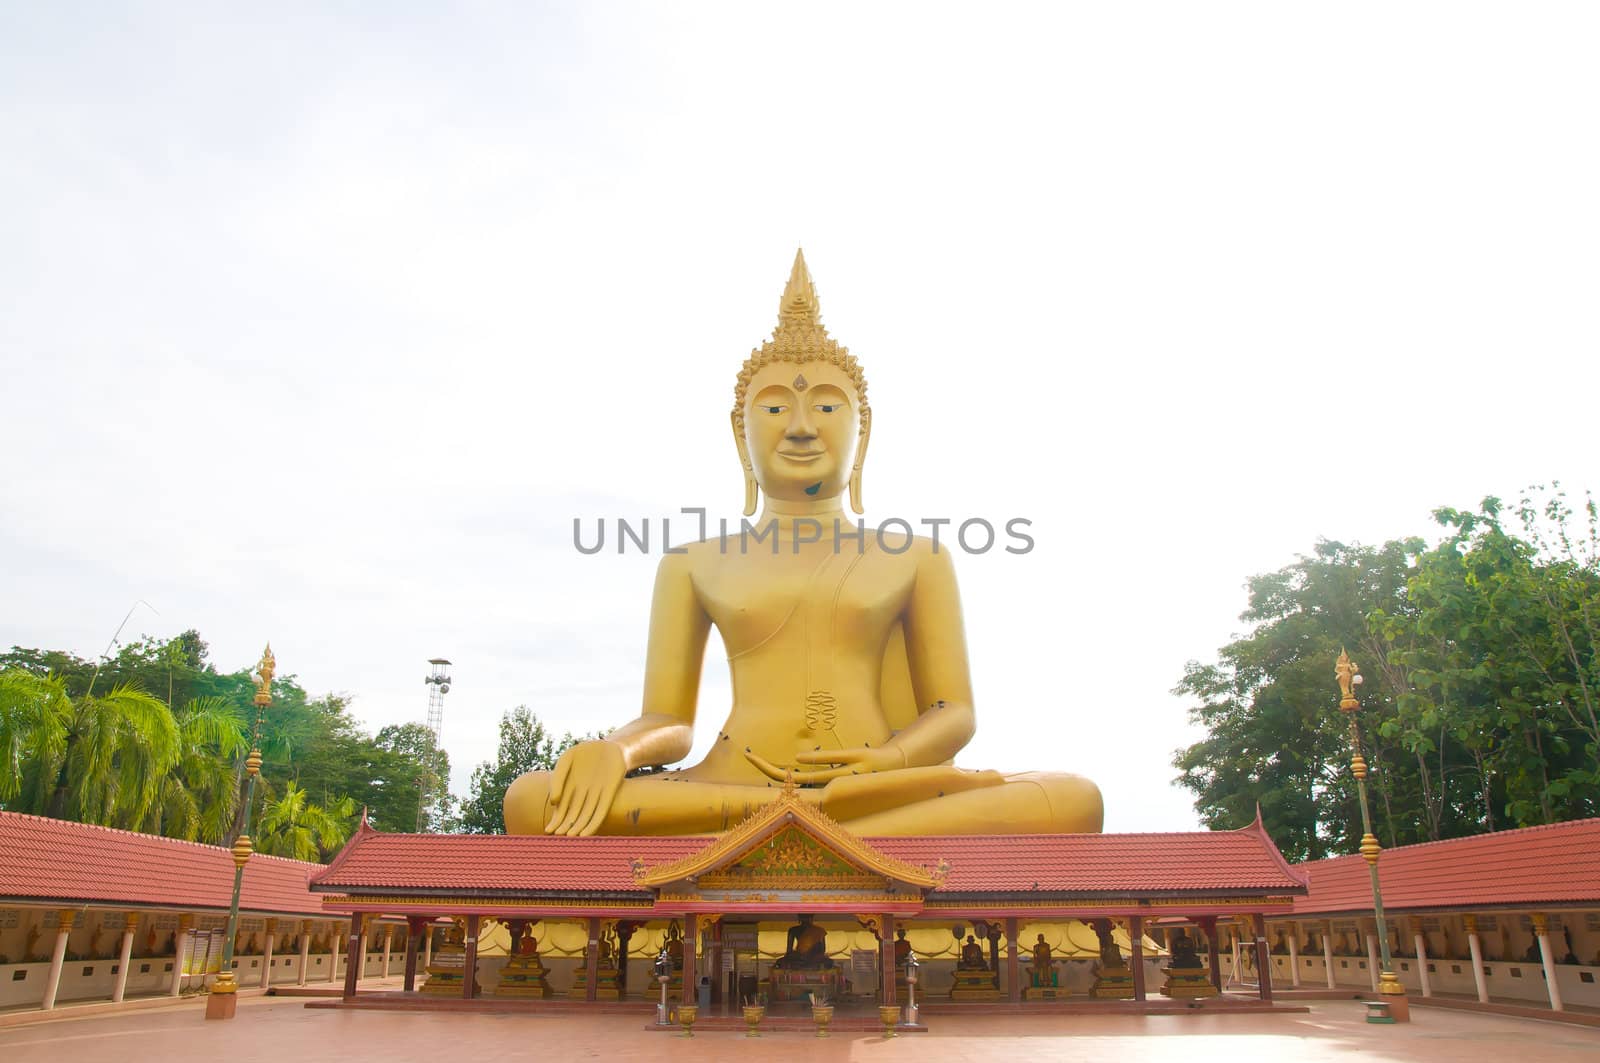 Golden Buddha statue at Wat Muang temple in Angthong, Thailand by swingvoodoo